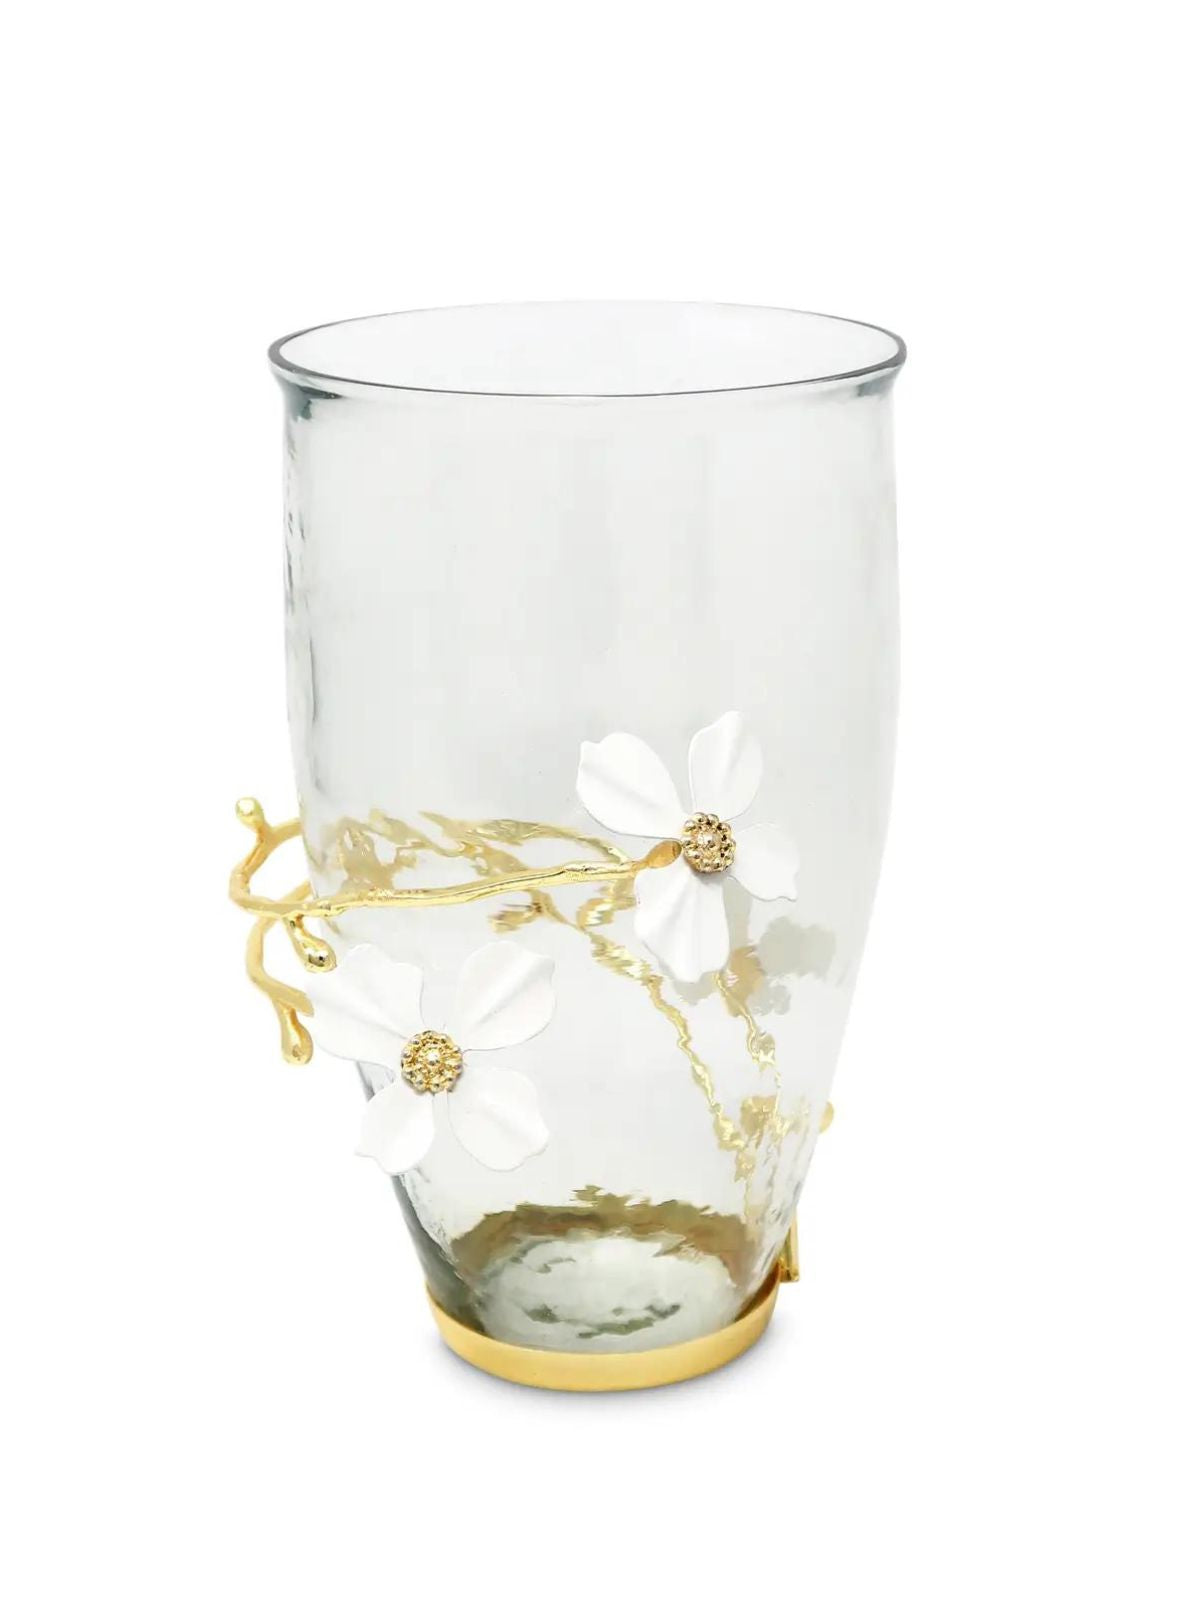 Stunning Glass Vase with Beautiful Gold Twirl Design and Delicate White Jewel Flowers - Luxurious Home Goods.